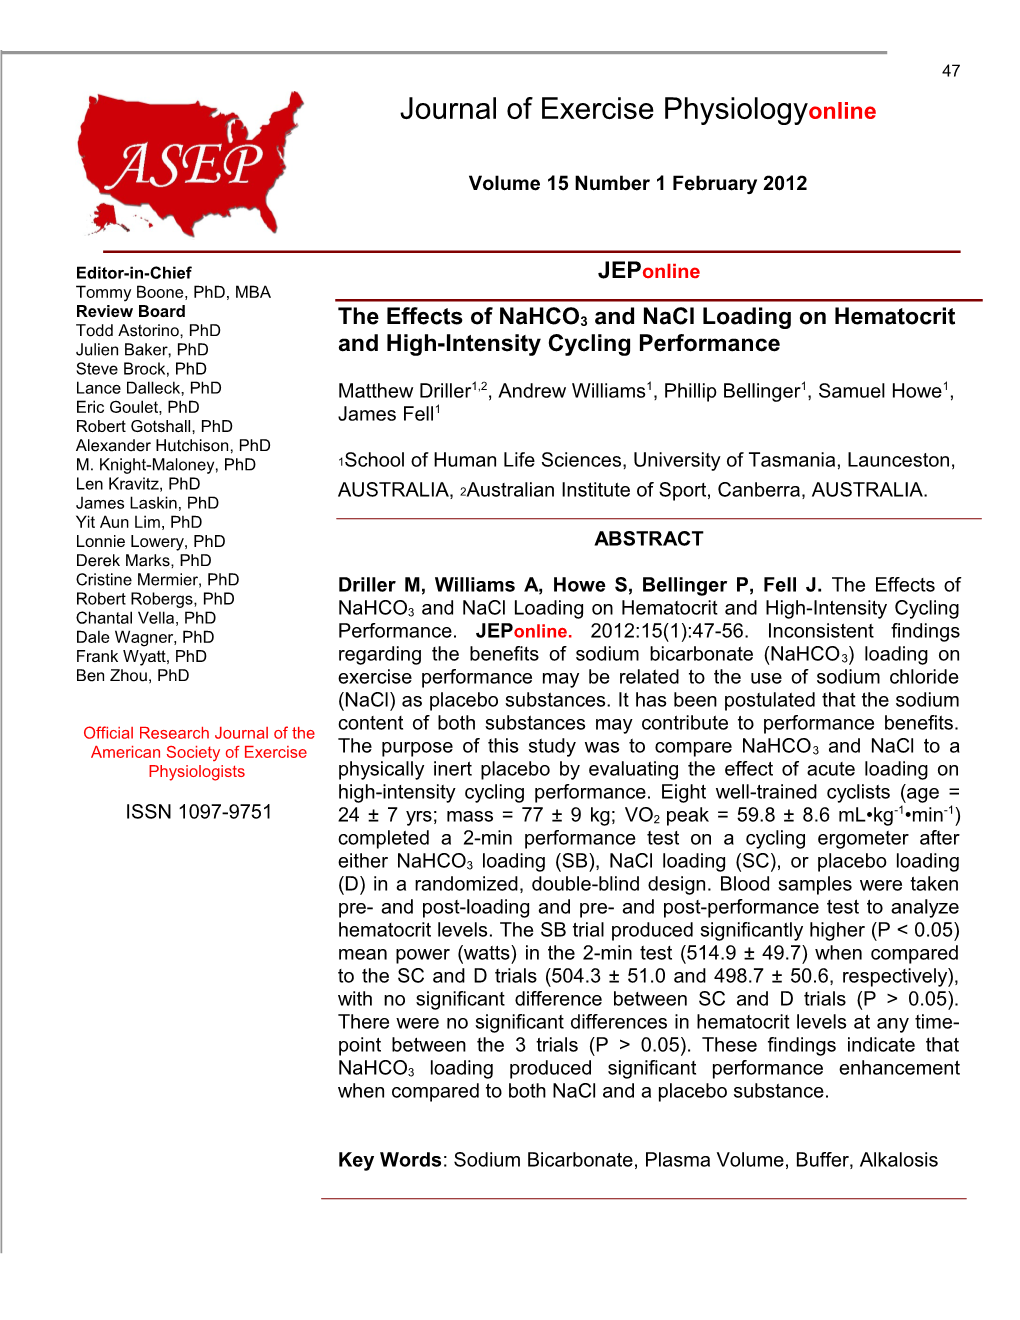 The Effects of Nahco3 and Nacl Loading on Hematocrit and High-Intensity Cycling Performance